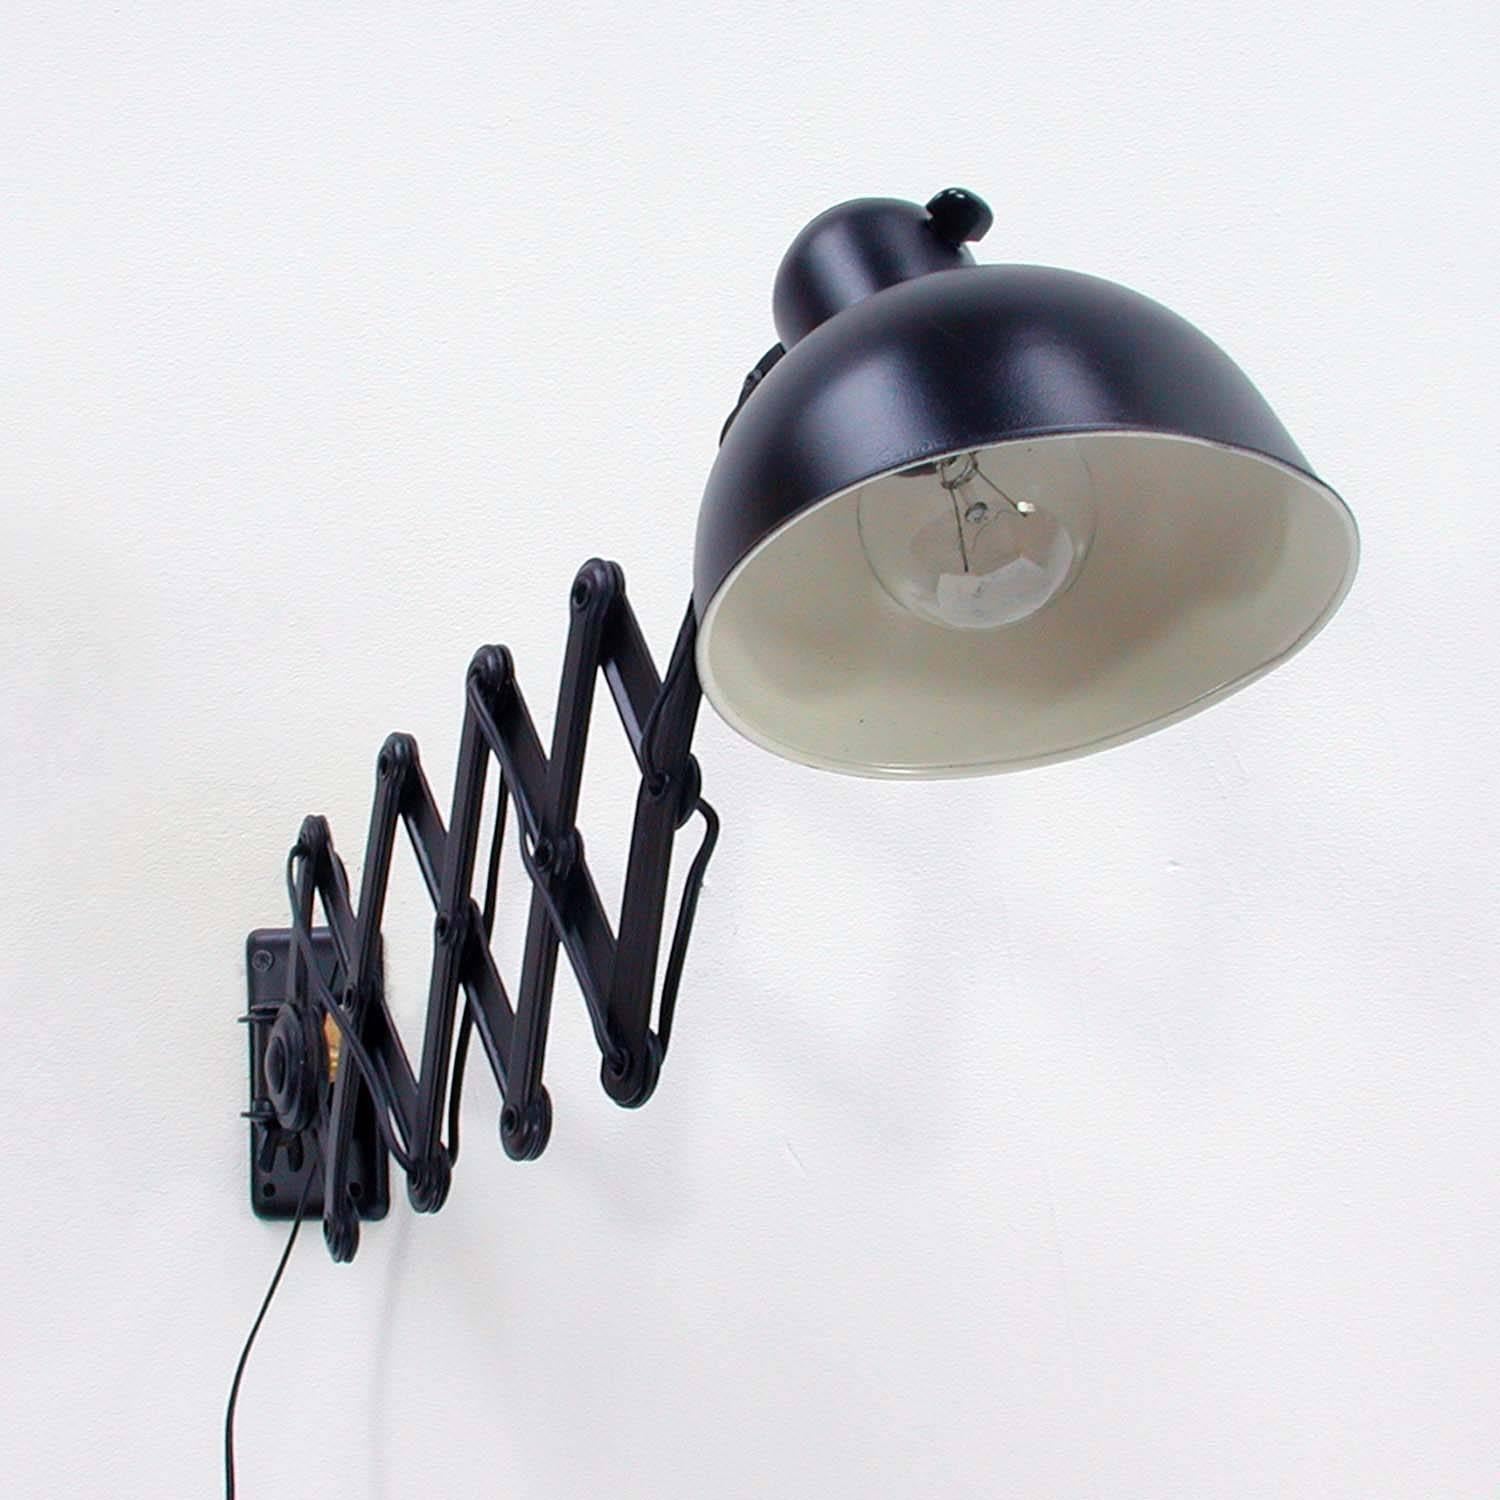 This black industrial scissors lamp (model no. 6718) was made in the 1930s and designed by Christian Dell for Kaiser Idell in Germany during the Bauhaus period. It is now regarded as a design classic.

The lamp has the original Kaiser Idell